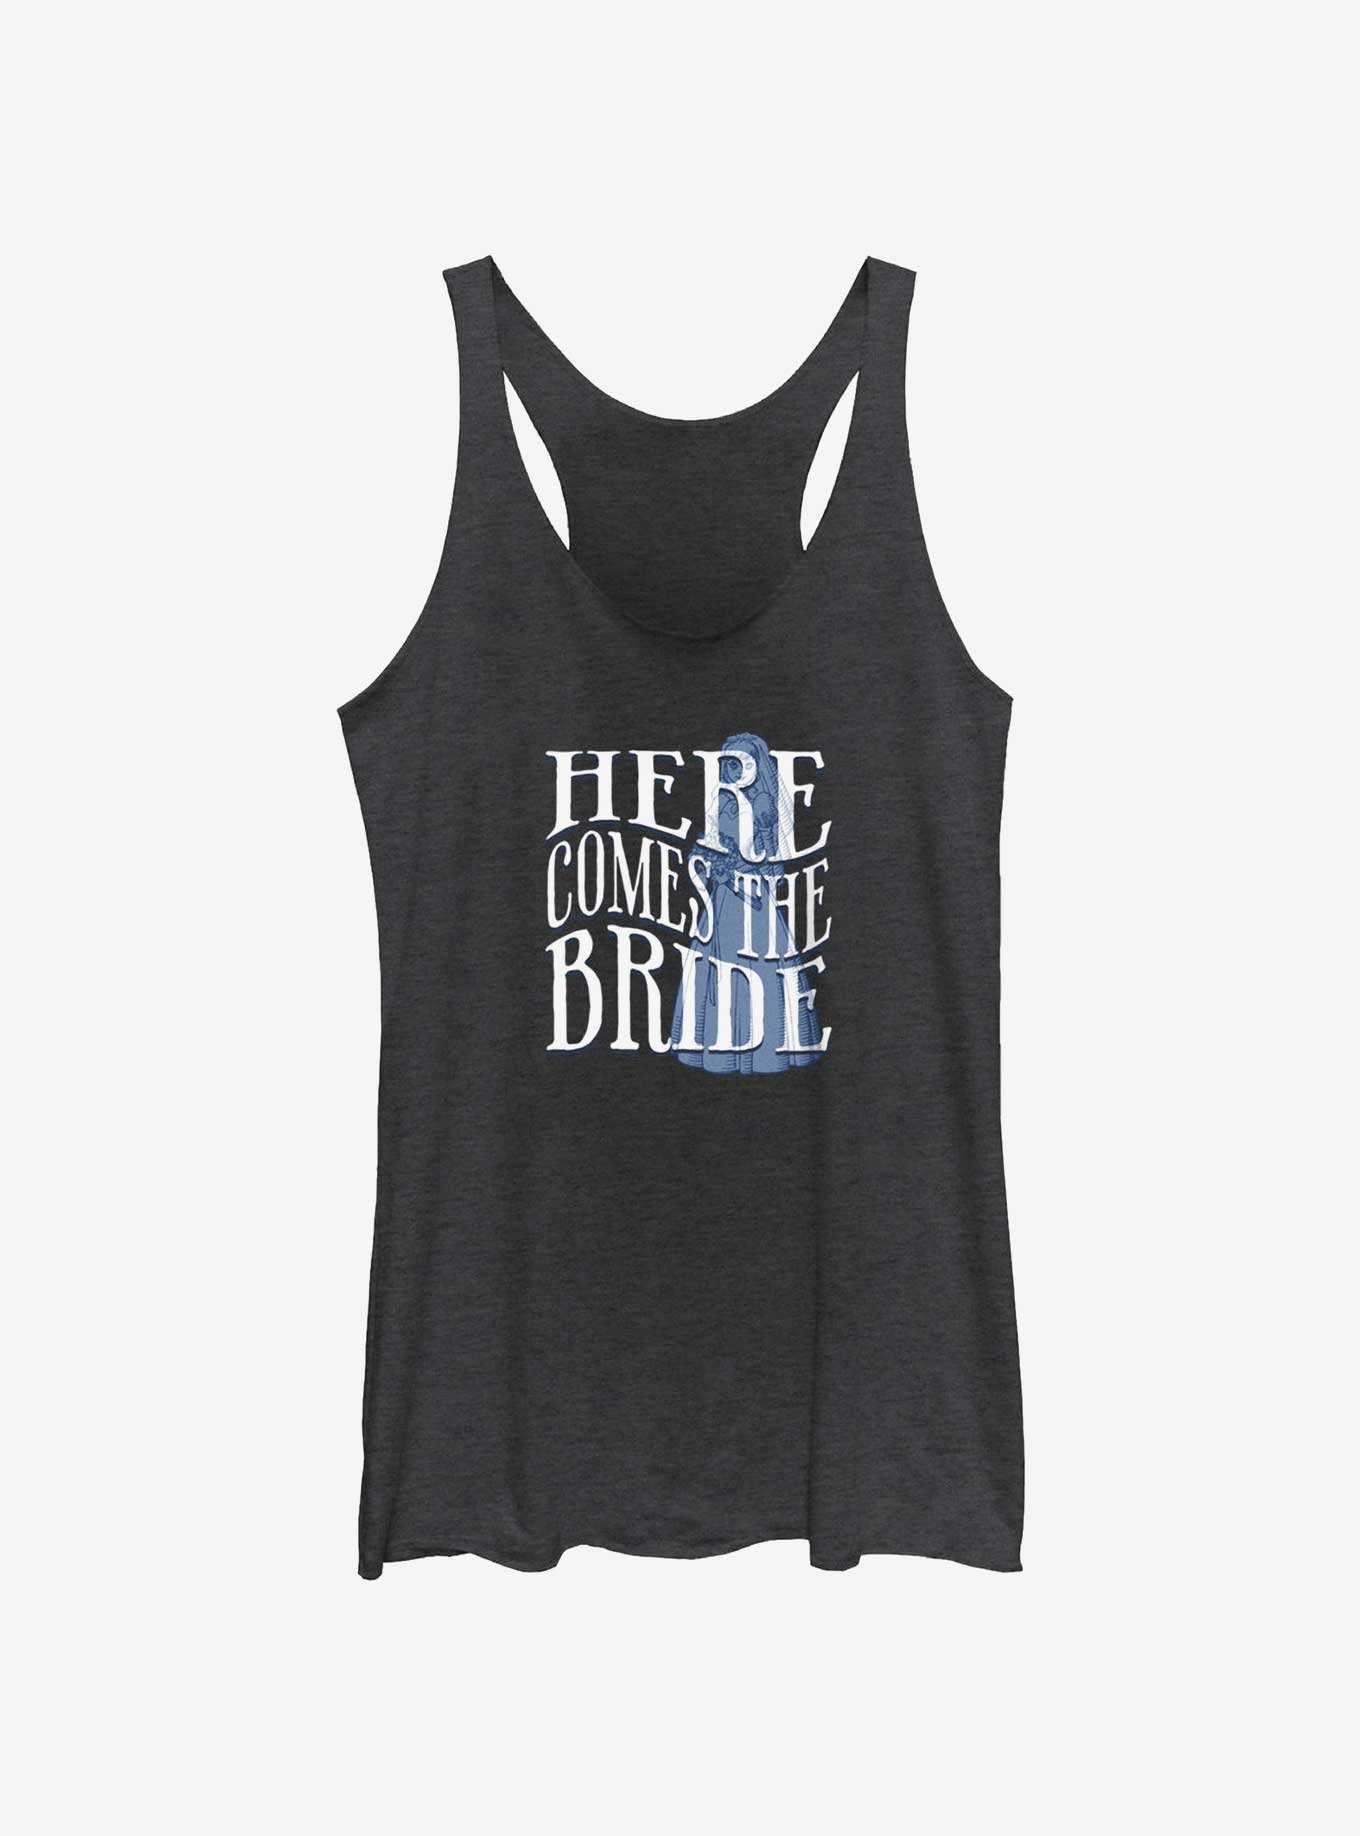 Disney Haunted Mansion Here Comes The Ghost Bride Girls Tank, , hi-res